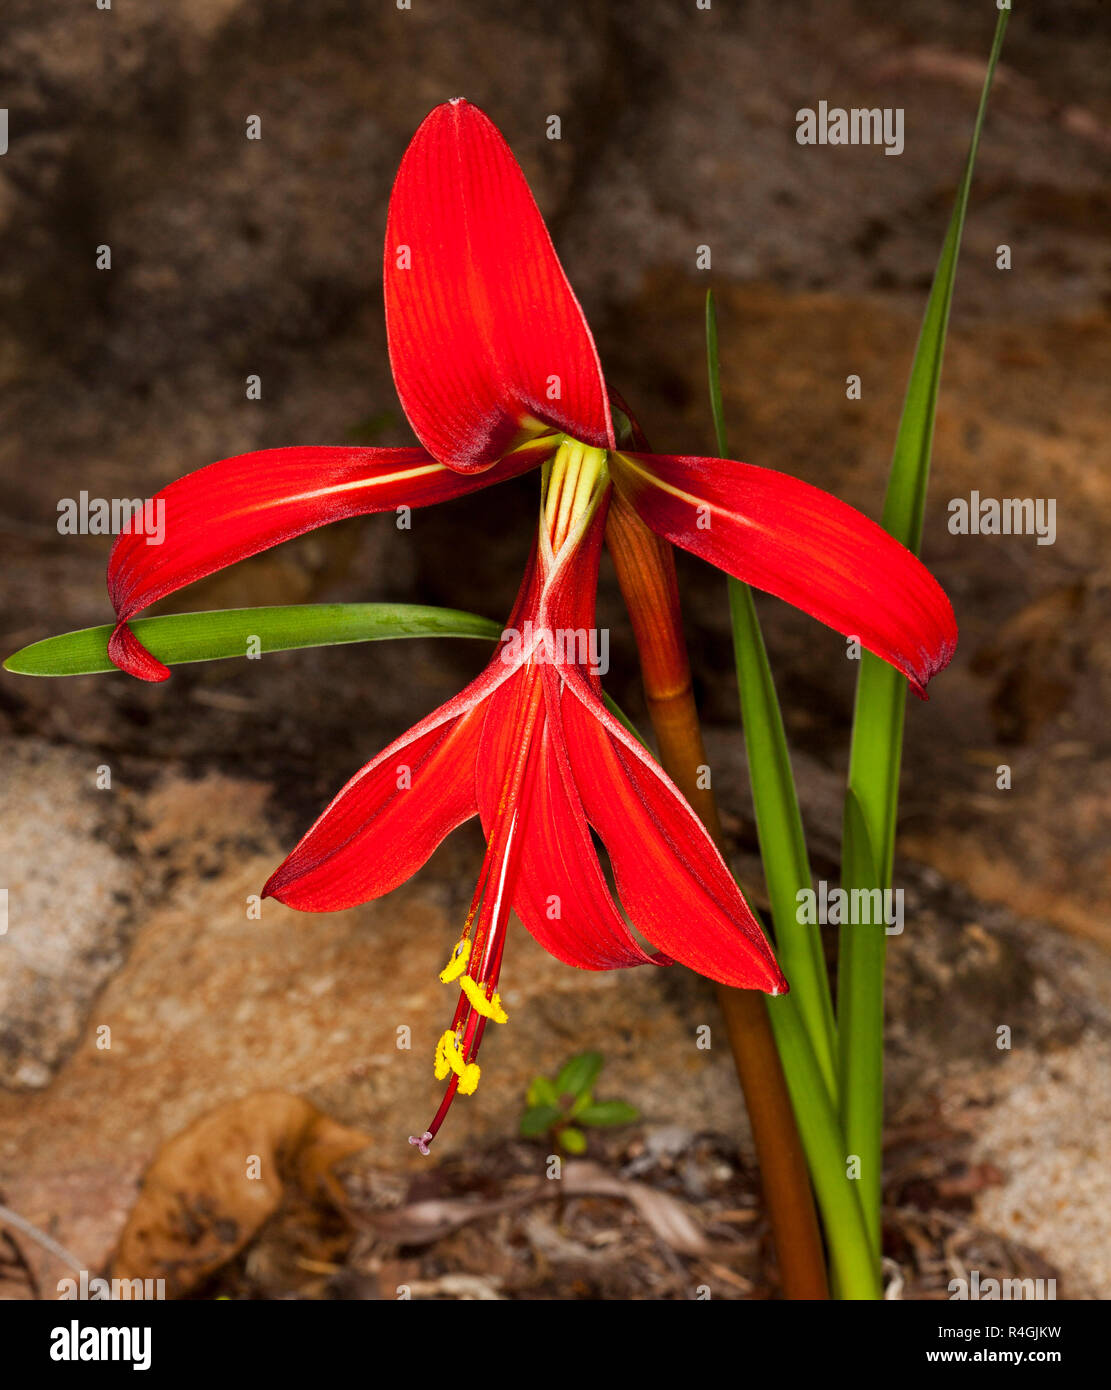 Vivid red flower and narrow green leaves of Jacobean lily, Sprekelia formosissima on brown background Stock Photo